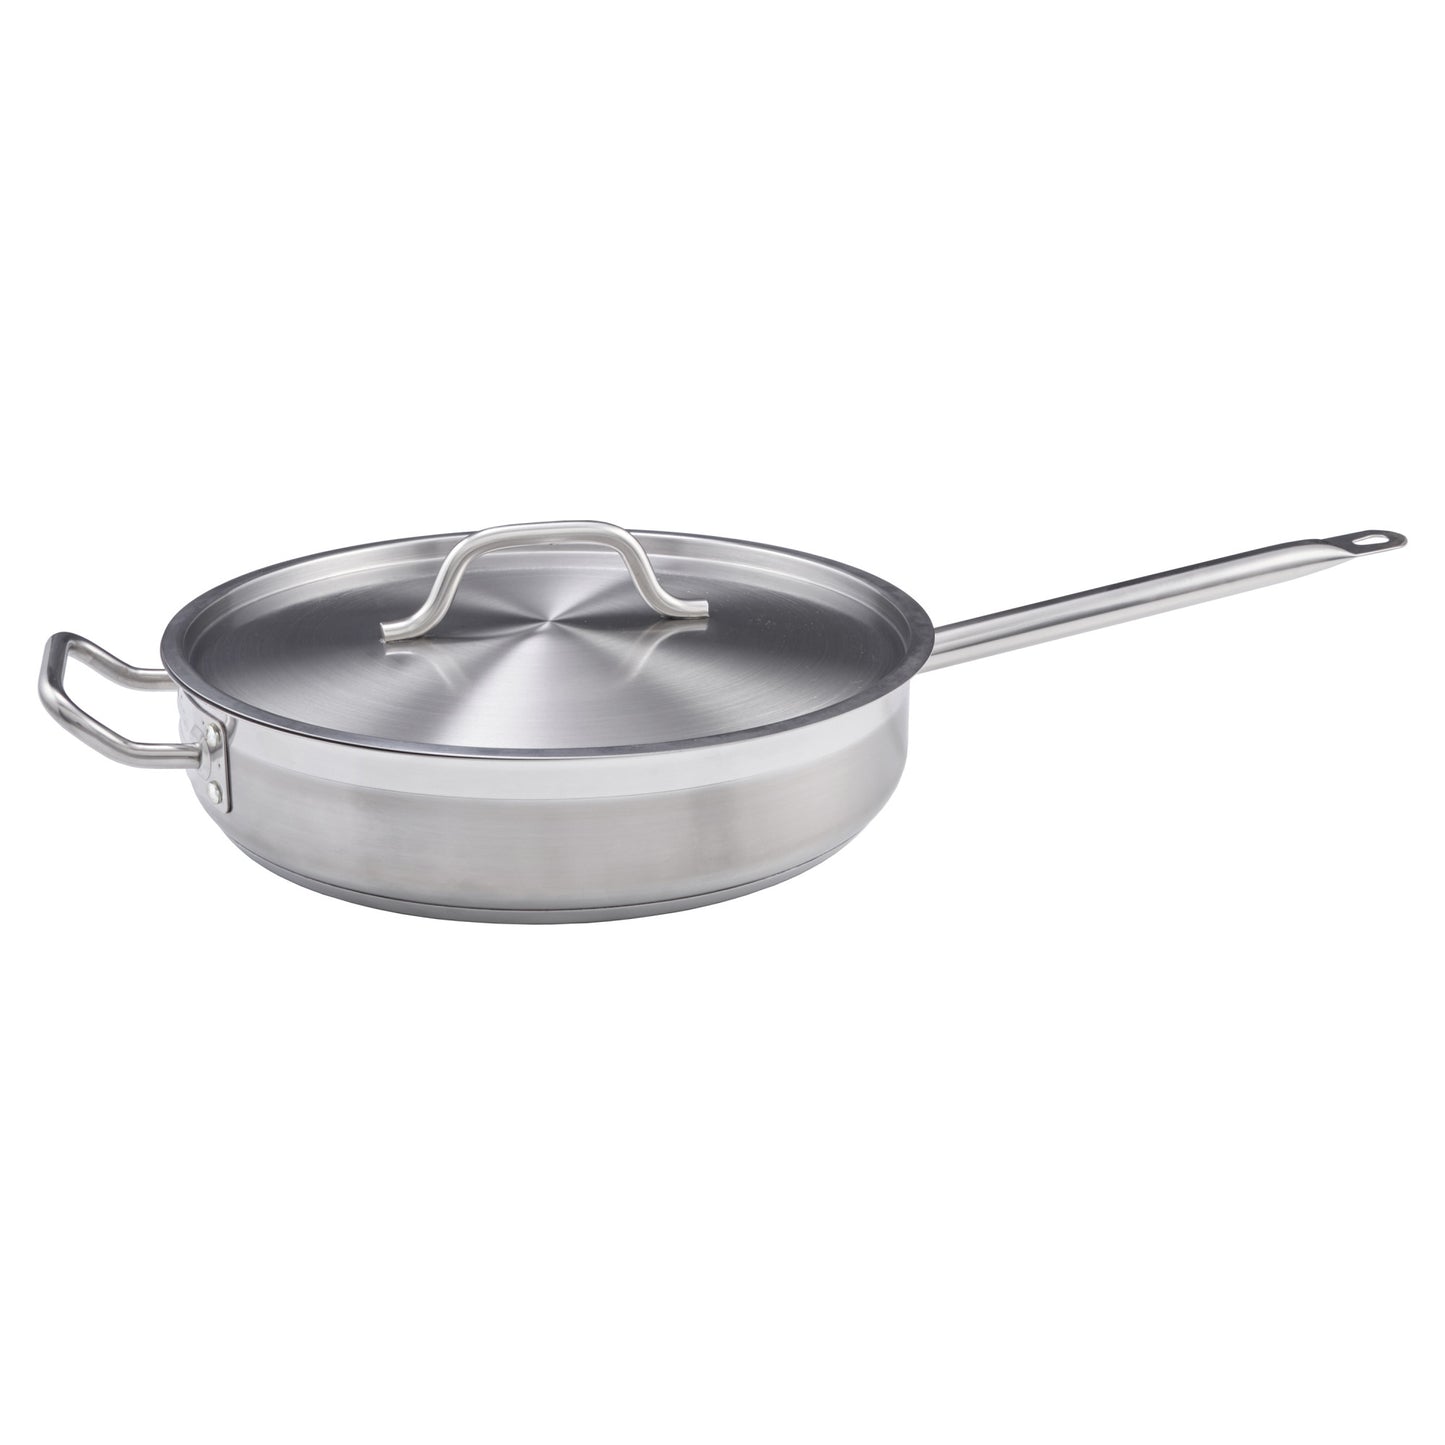 Stainless Steel Saut Pan with Cover - 7 Quart